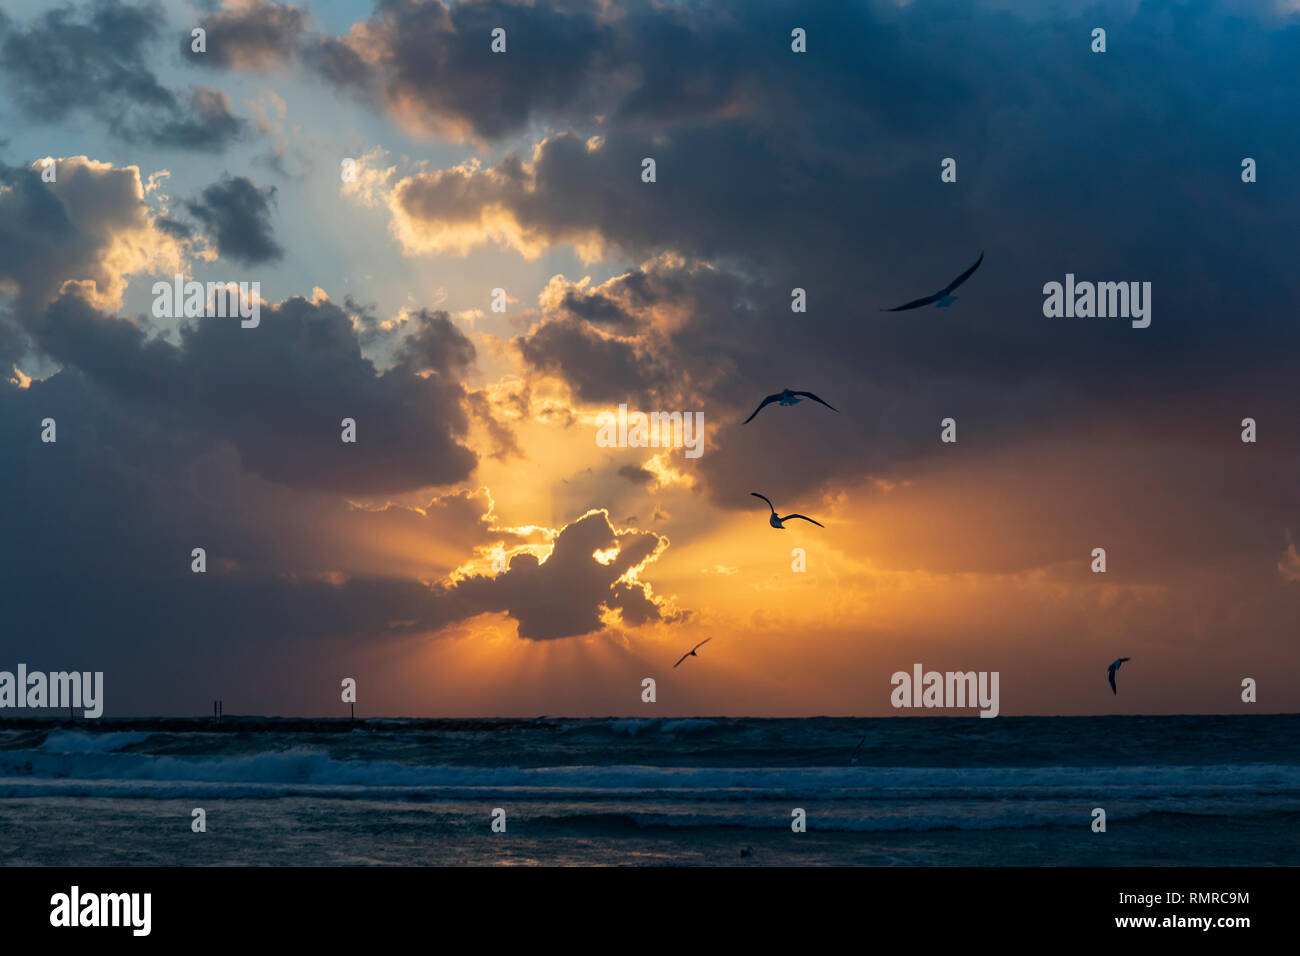 A sunset over the mediterranean, with seagulls in the cloudy sky, photographed from the beach of Tel Aviv, Israel Stock Photo